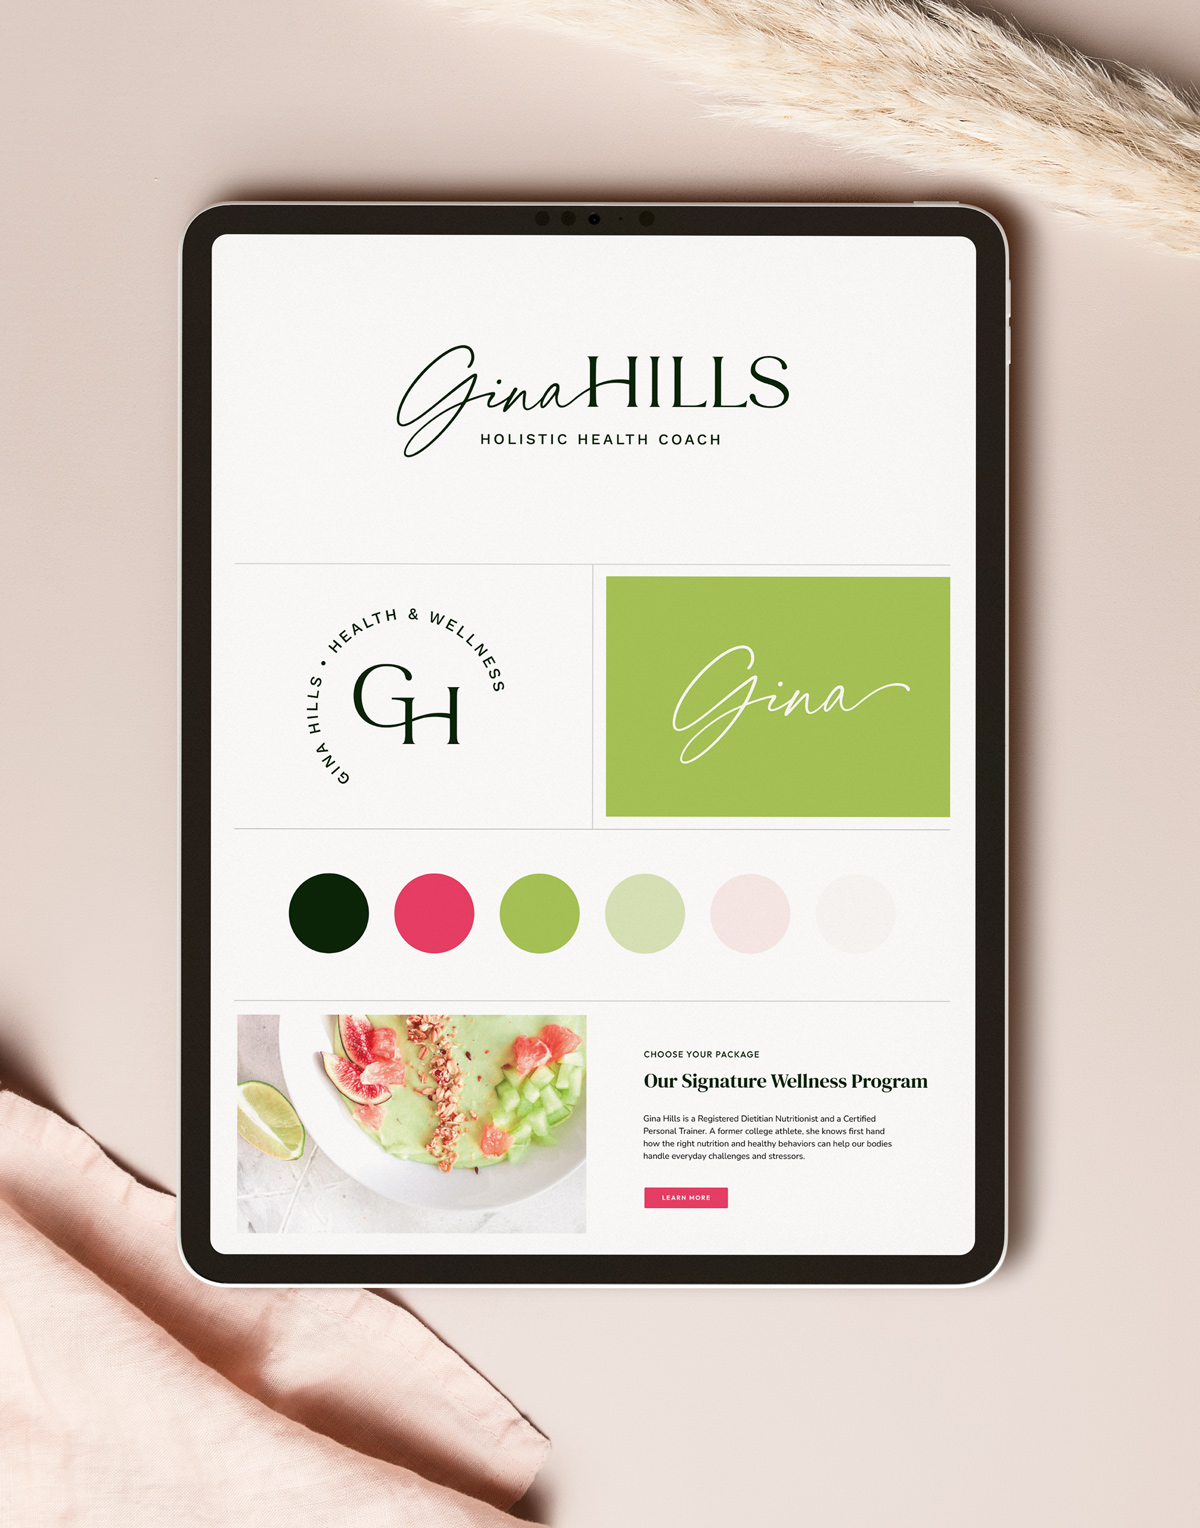 Brand style guide overview for Gina Hills, a semi-custom brand kit for personal trainers and coaches